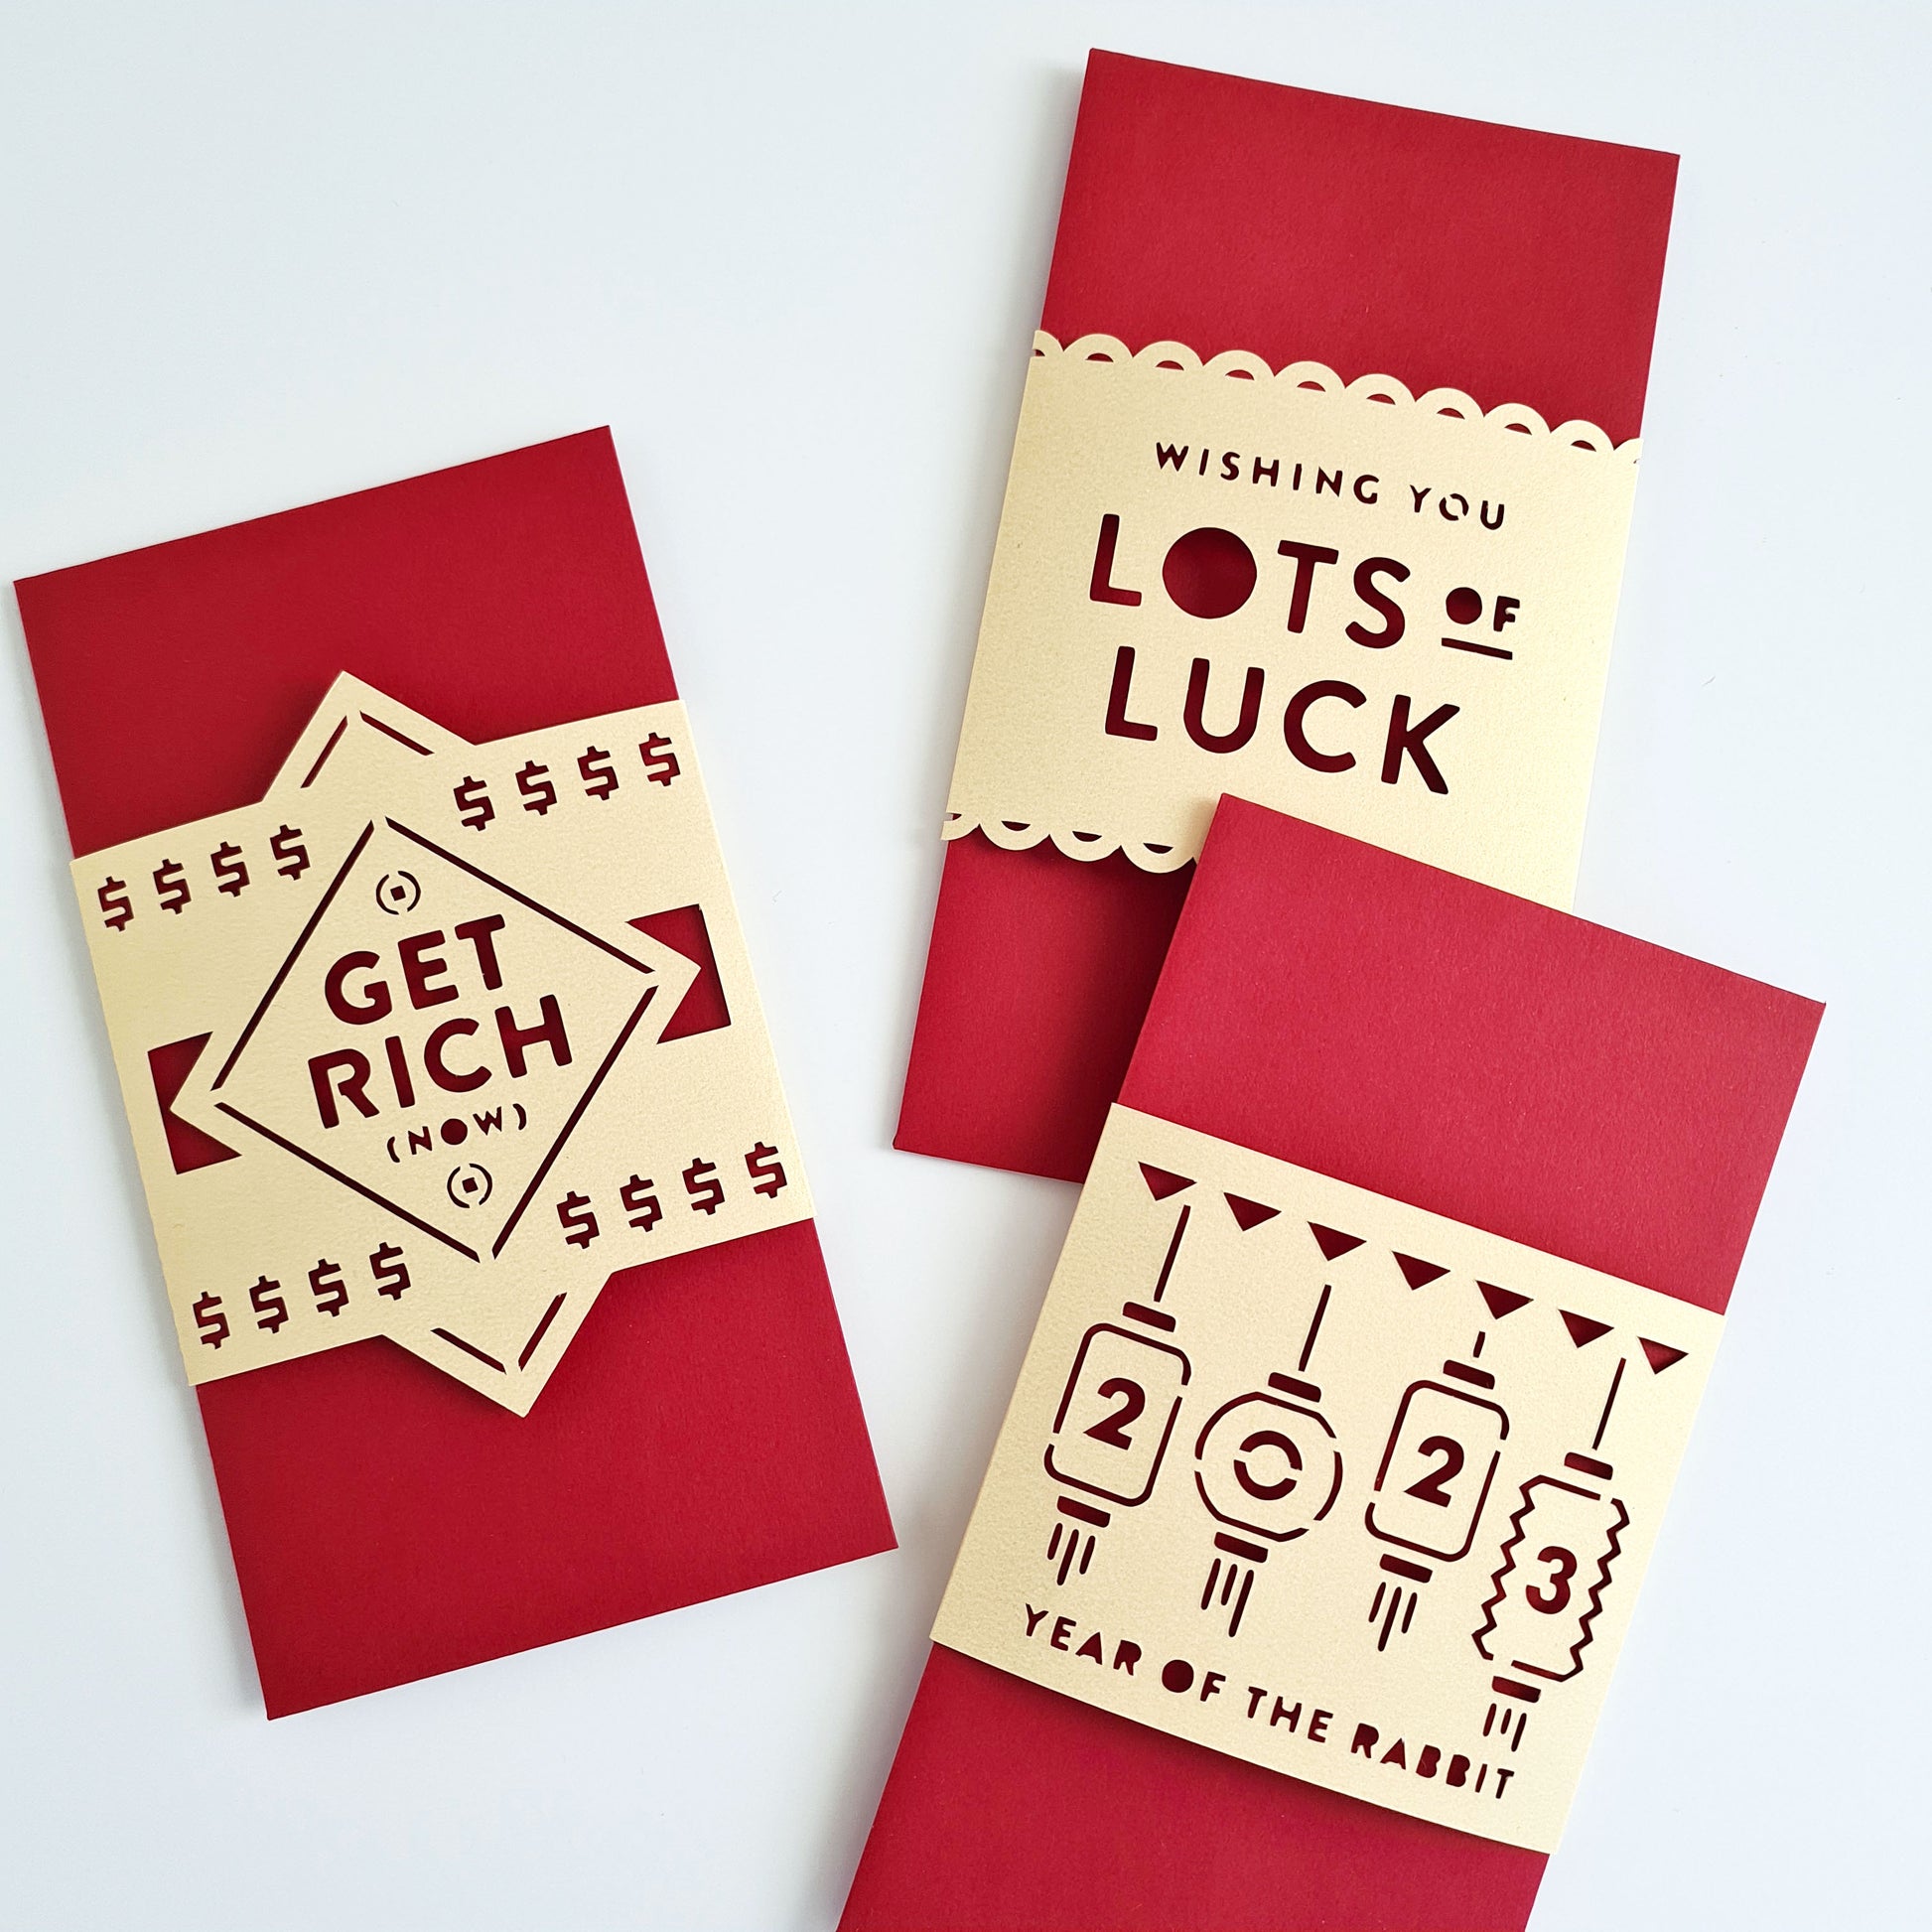 2023 Lunar New Year Red Envelopes, Set of 6 Designs – HooHoo And Mouse